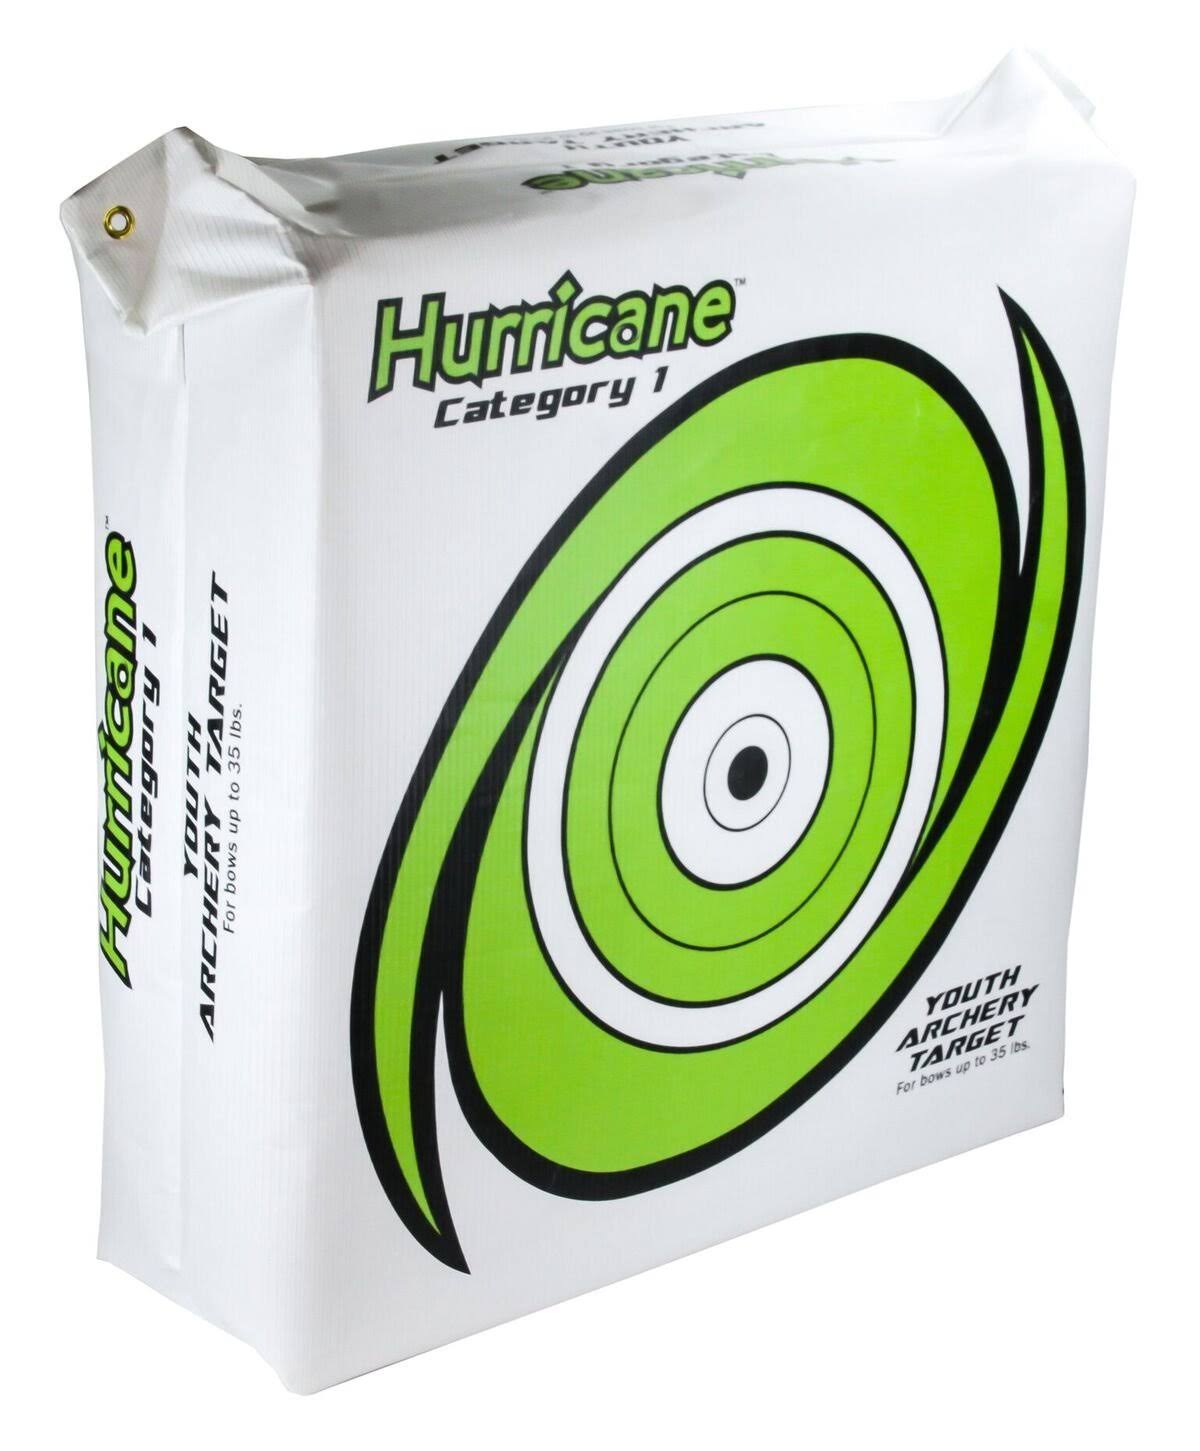 Hurricane Category 1 Youth Archery Target